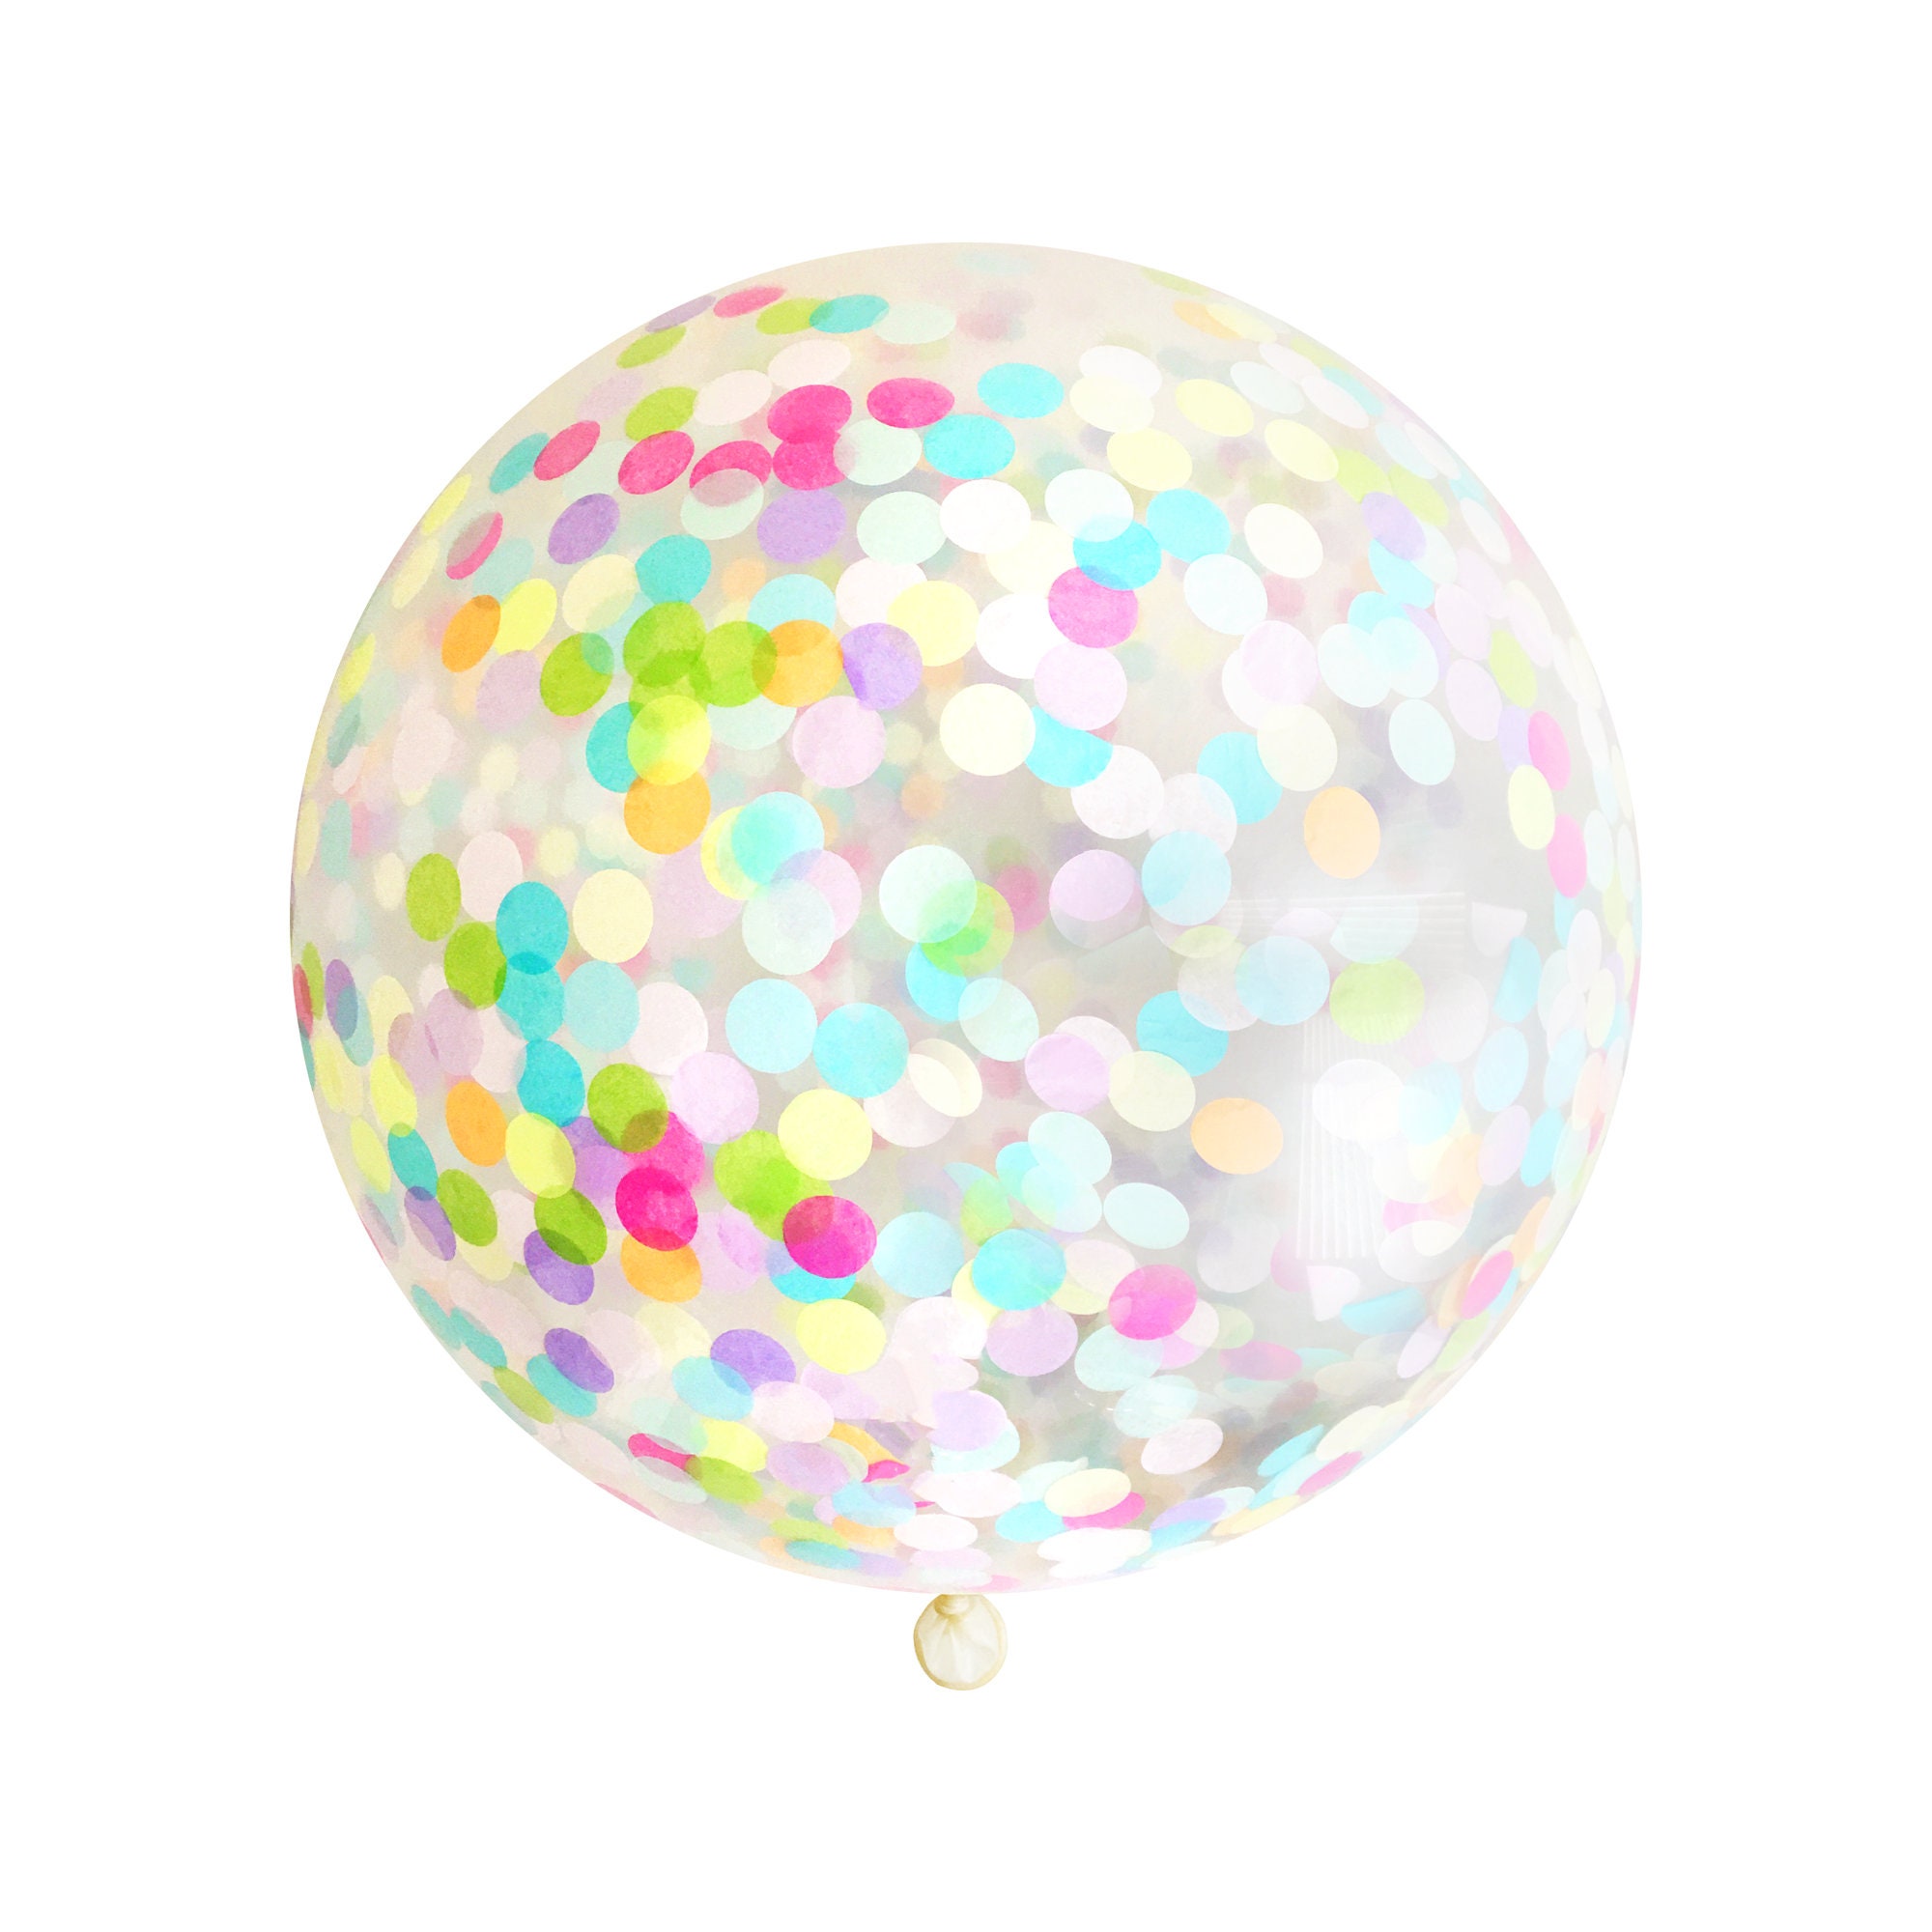 Buy Confetti Balloon Blue Party 36 Inch Large & Small Gold Online in India  